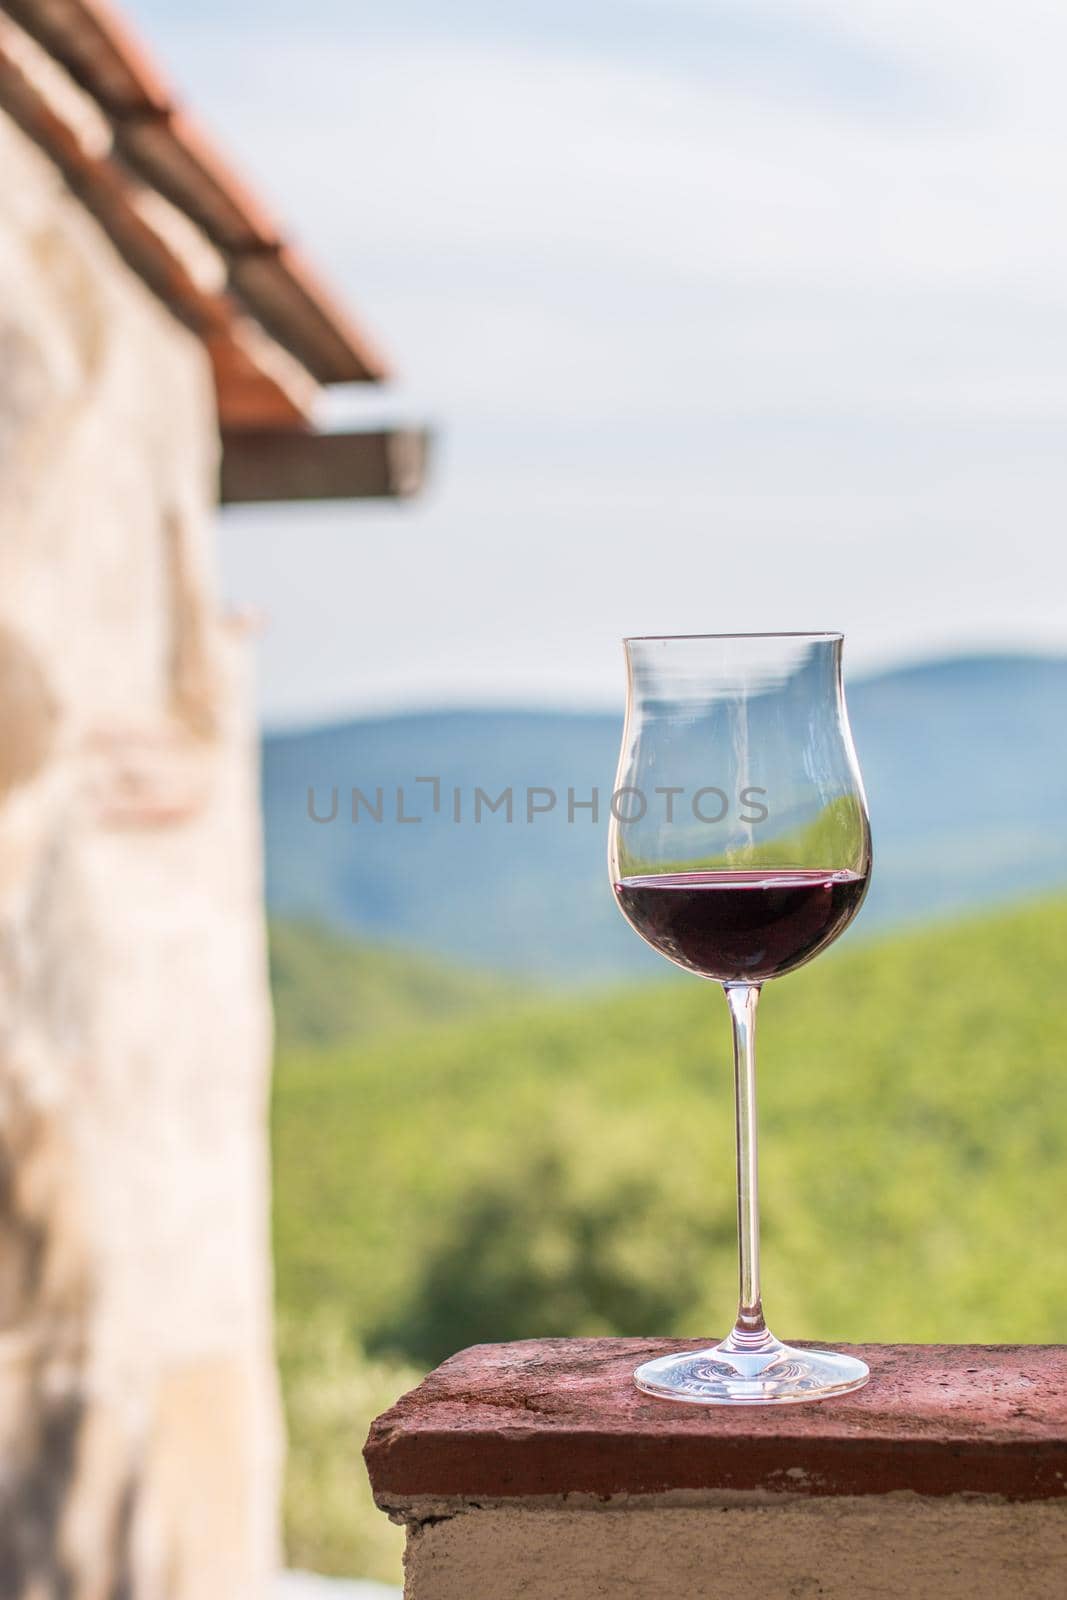 Enjoying a glass of red wine at Tuscany, Italy. Blurry wine yards in the background.